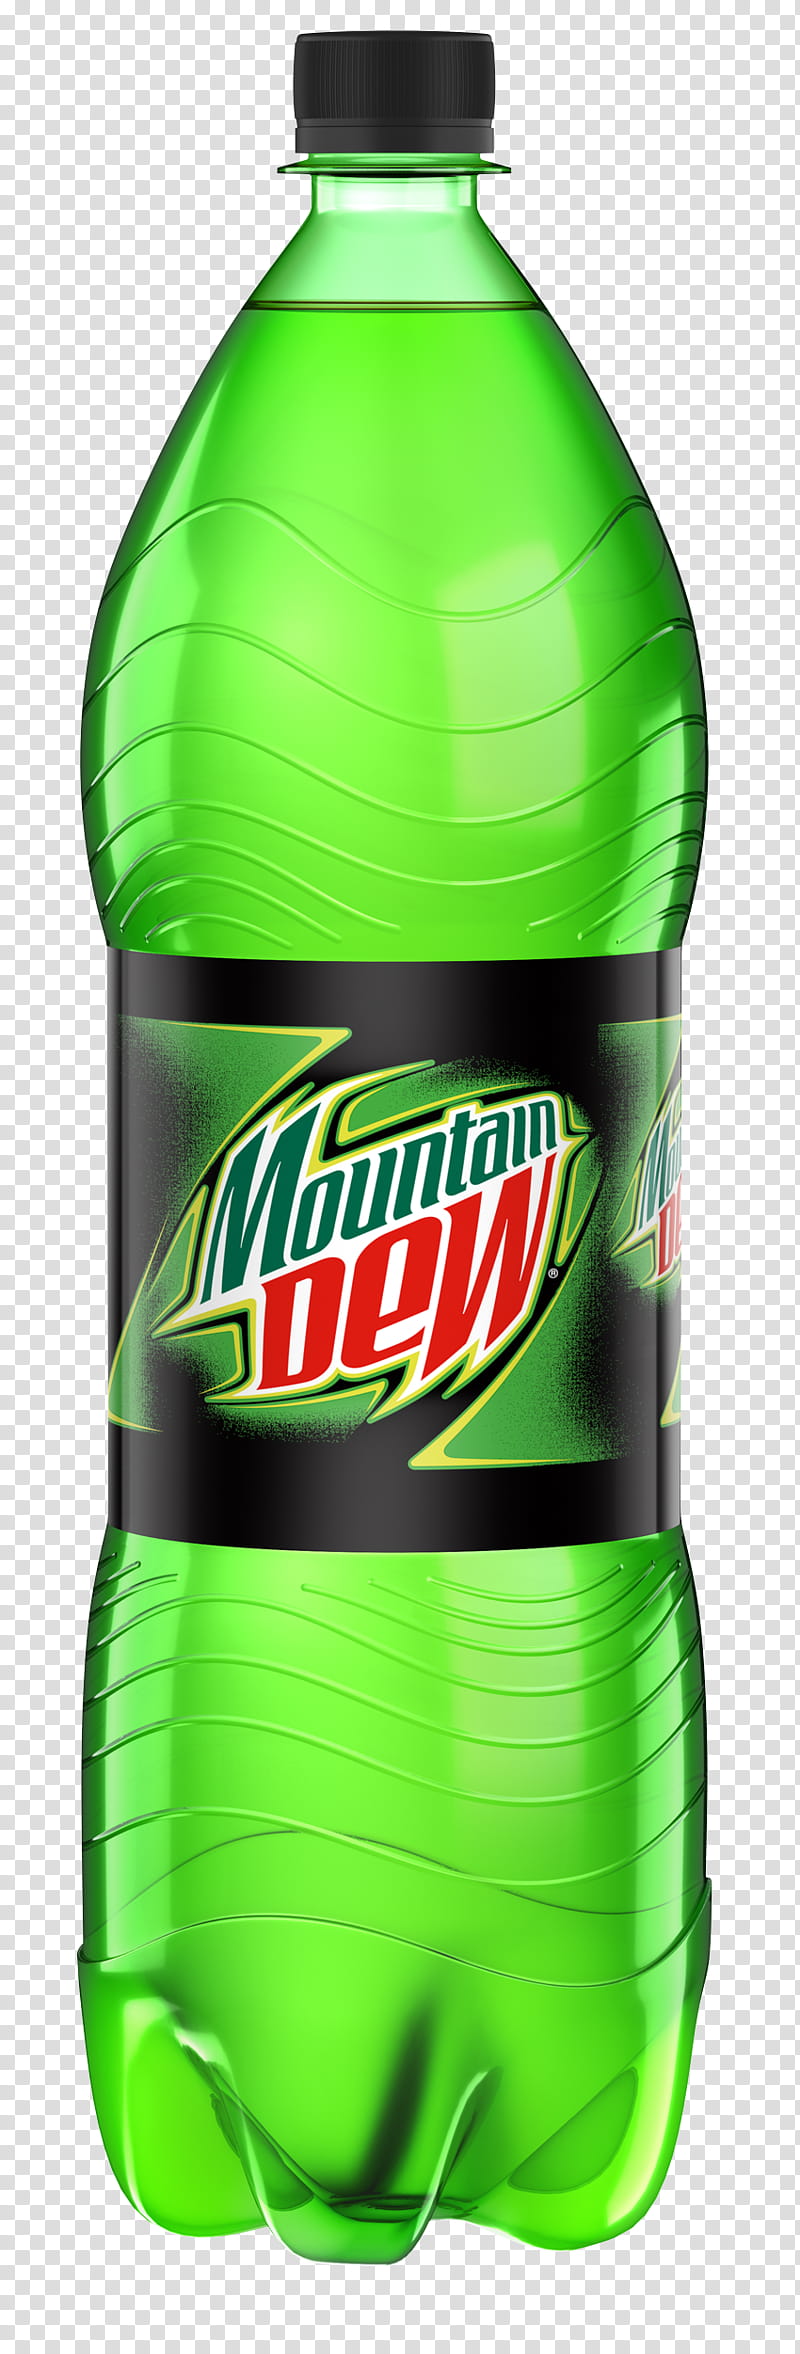 Mountain, Fizzy Drinks, Pepsi, Cola, Cocacola, Sprite, Mountain Dew, 7 Up transparent background PNG clipart